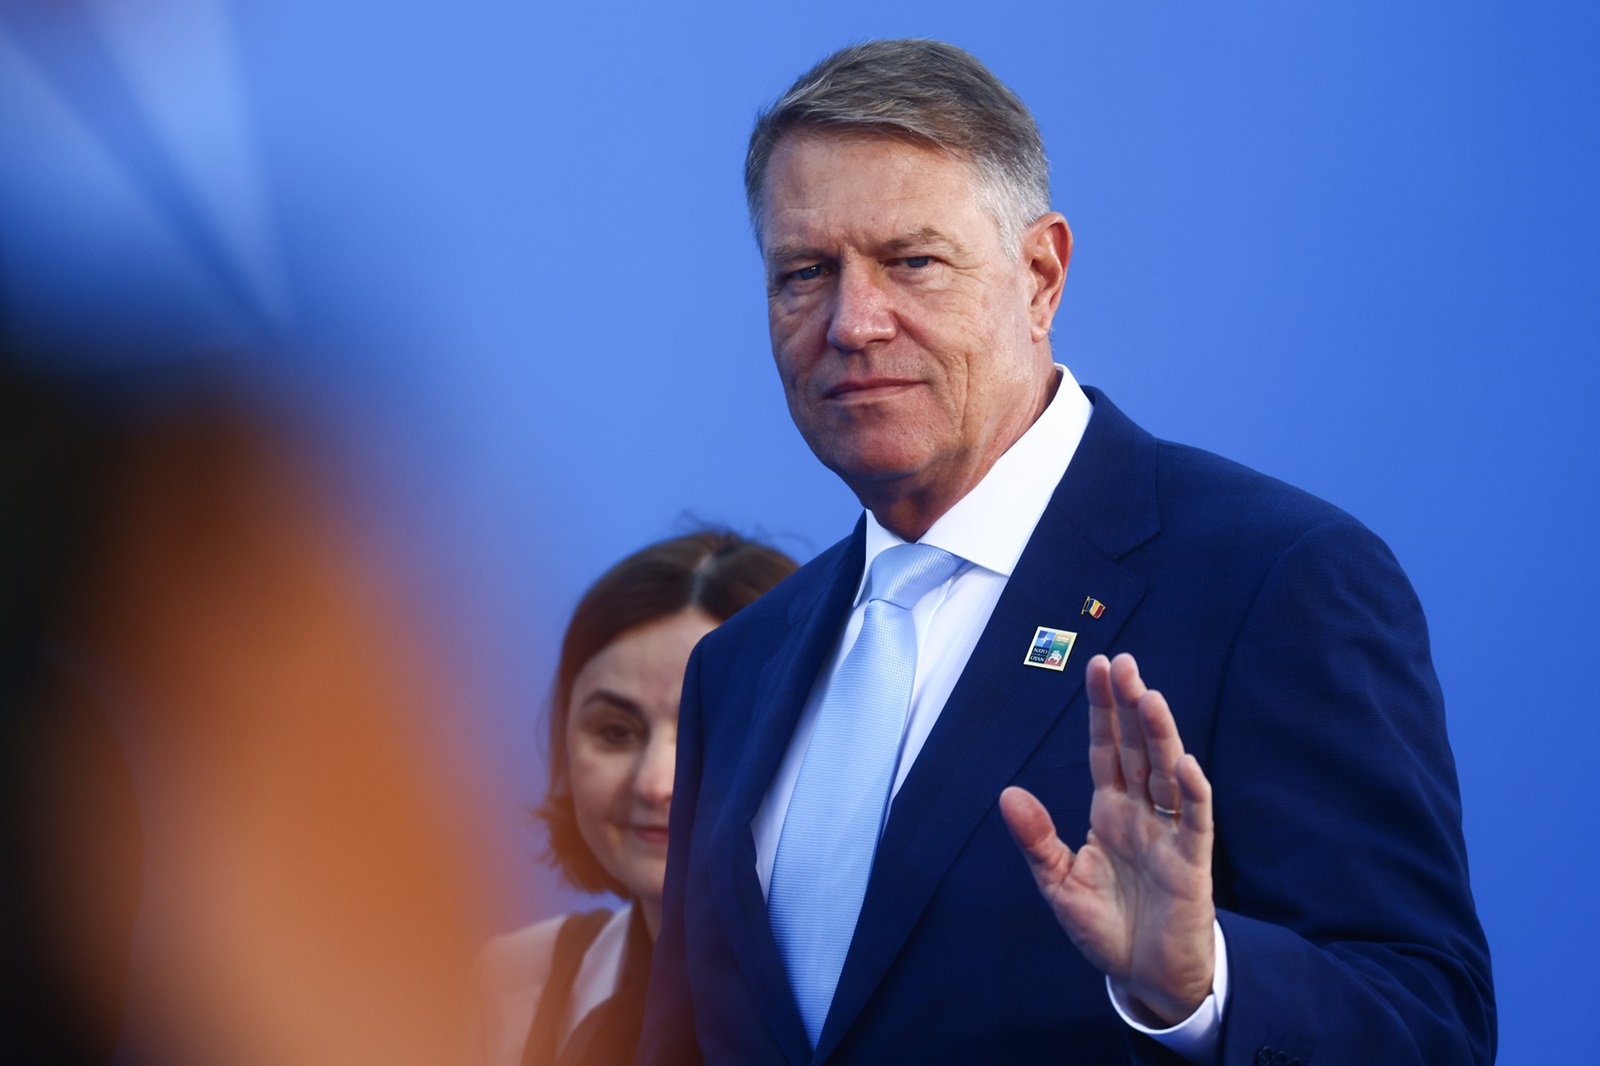 July 12, 2023, Vilnius, Lithuania: Klaus Iohannis, the President of Romania, attends NATO Summit at LITEXPO Lithuanian Exhibition and Congress Center in Vilnius, Lithuania on July 12, 2023.,Image: 788954331, License: Rights-managed, Restrictions: * France Rights OUT *, Model Release: no, Credit line: Beata Zawrzel / Zuma Press / Profimedia